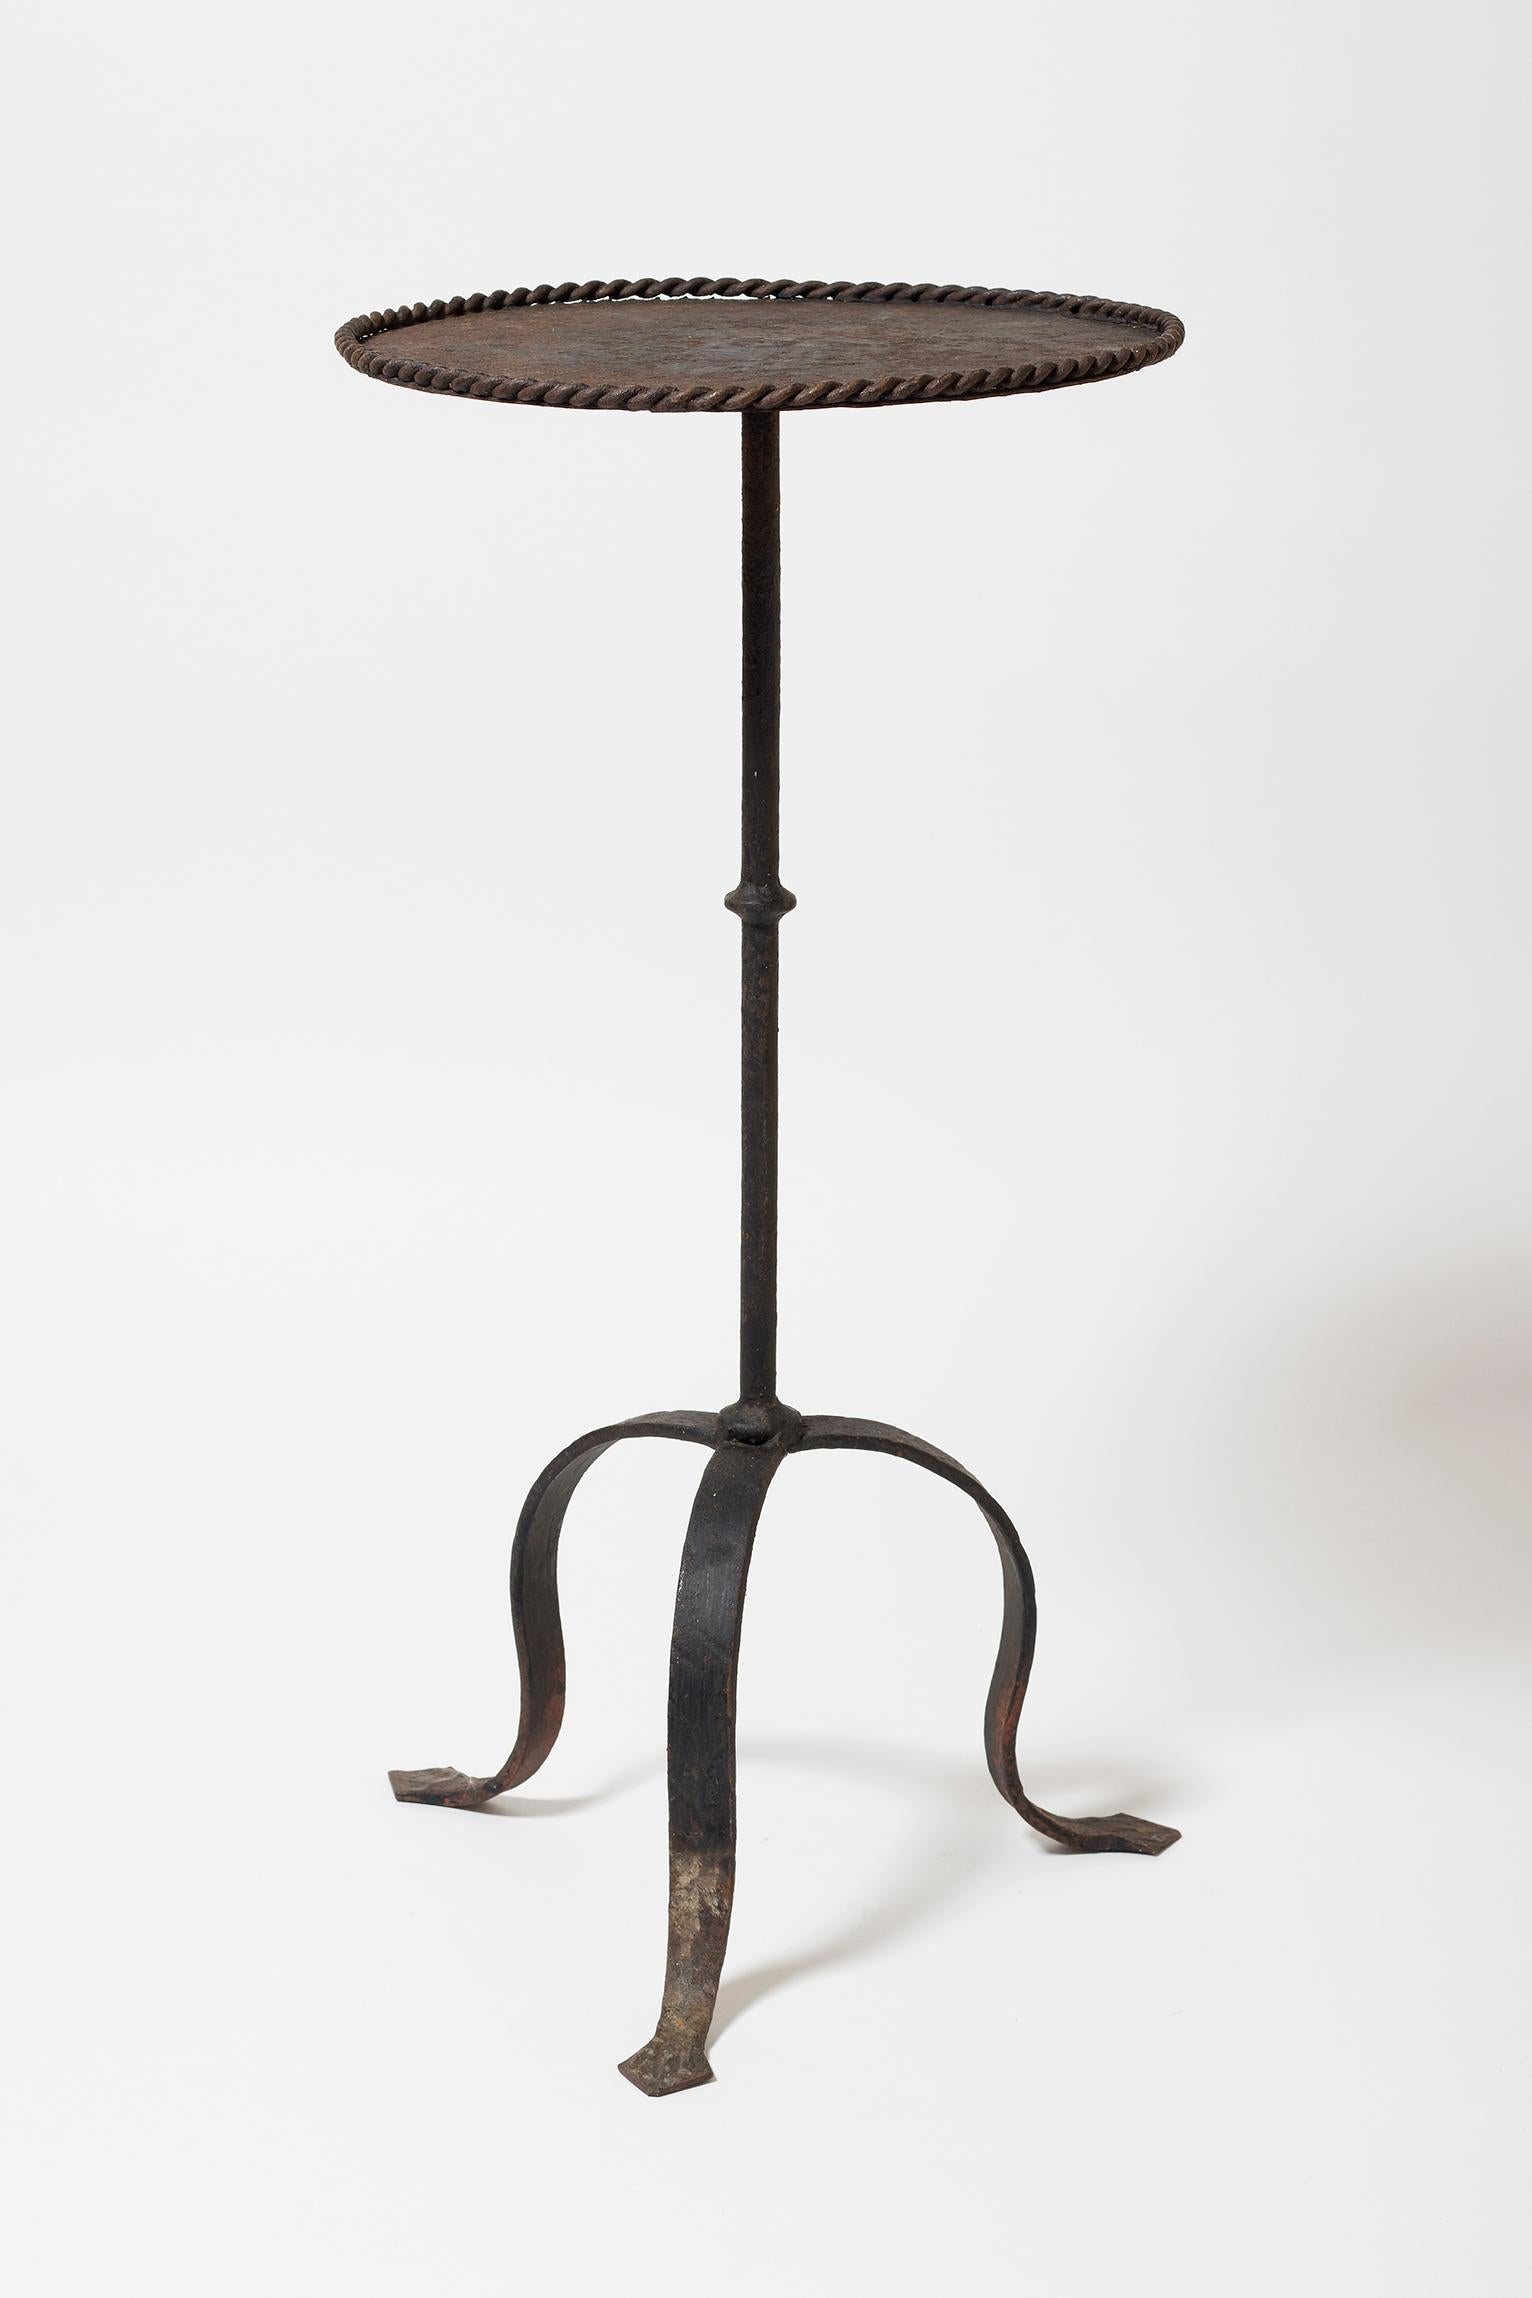 A black wrought iron martini table, with a twisted rop edge
Spain, 1950s.